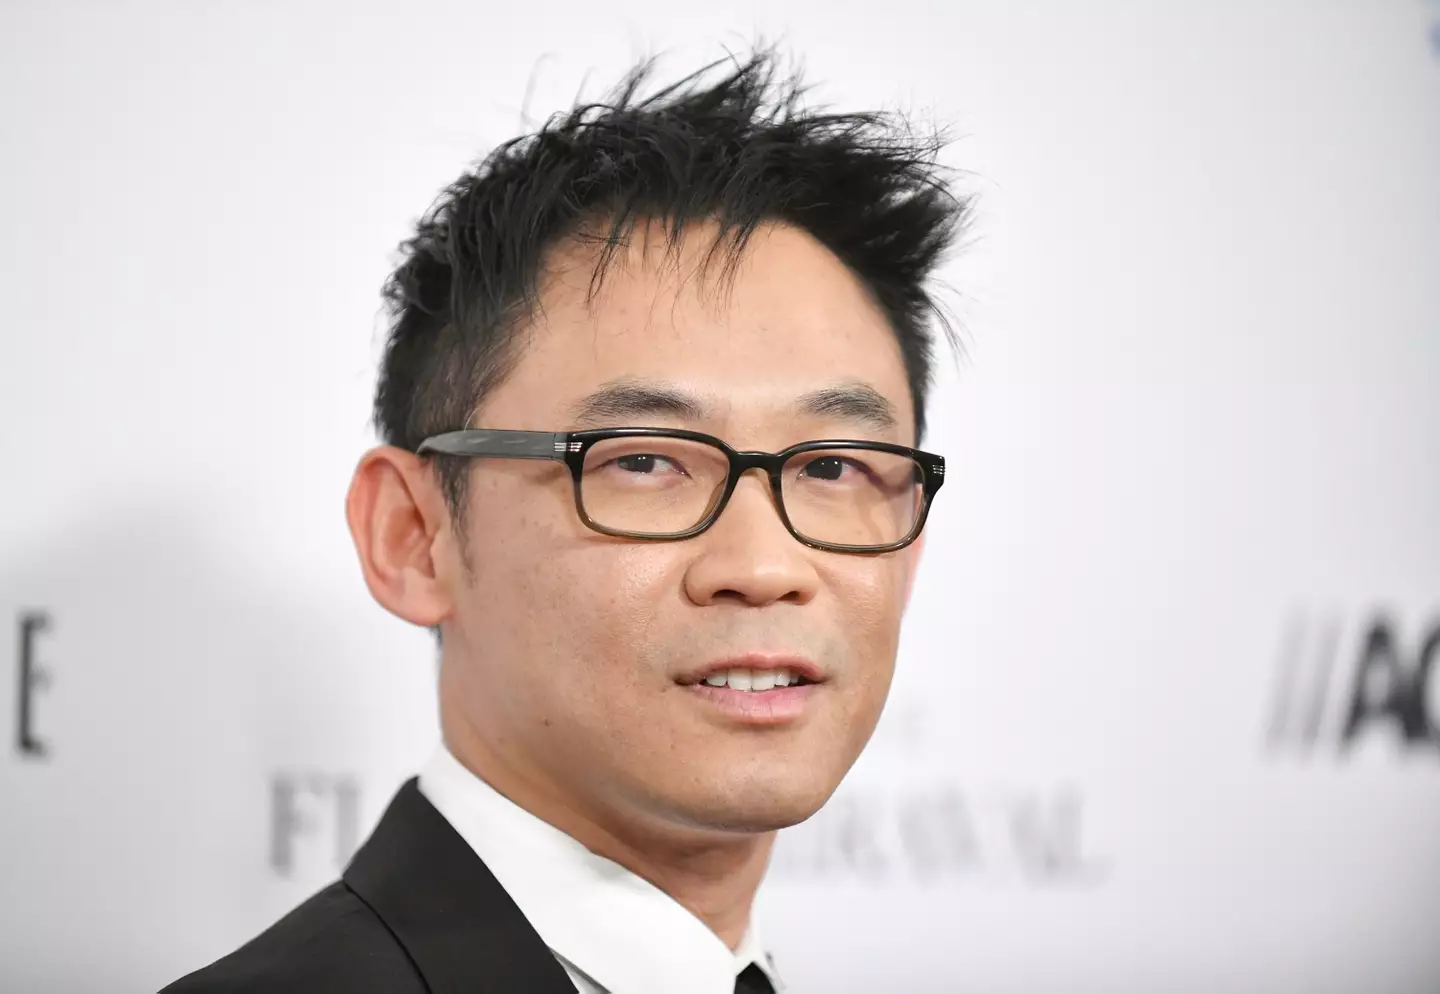 Aquaman 2 director James Wan said Heard's role was always going to be smaller.